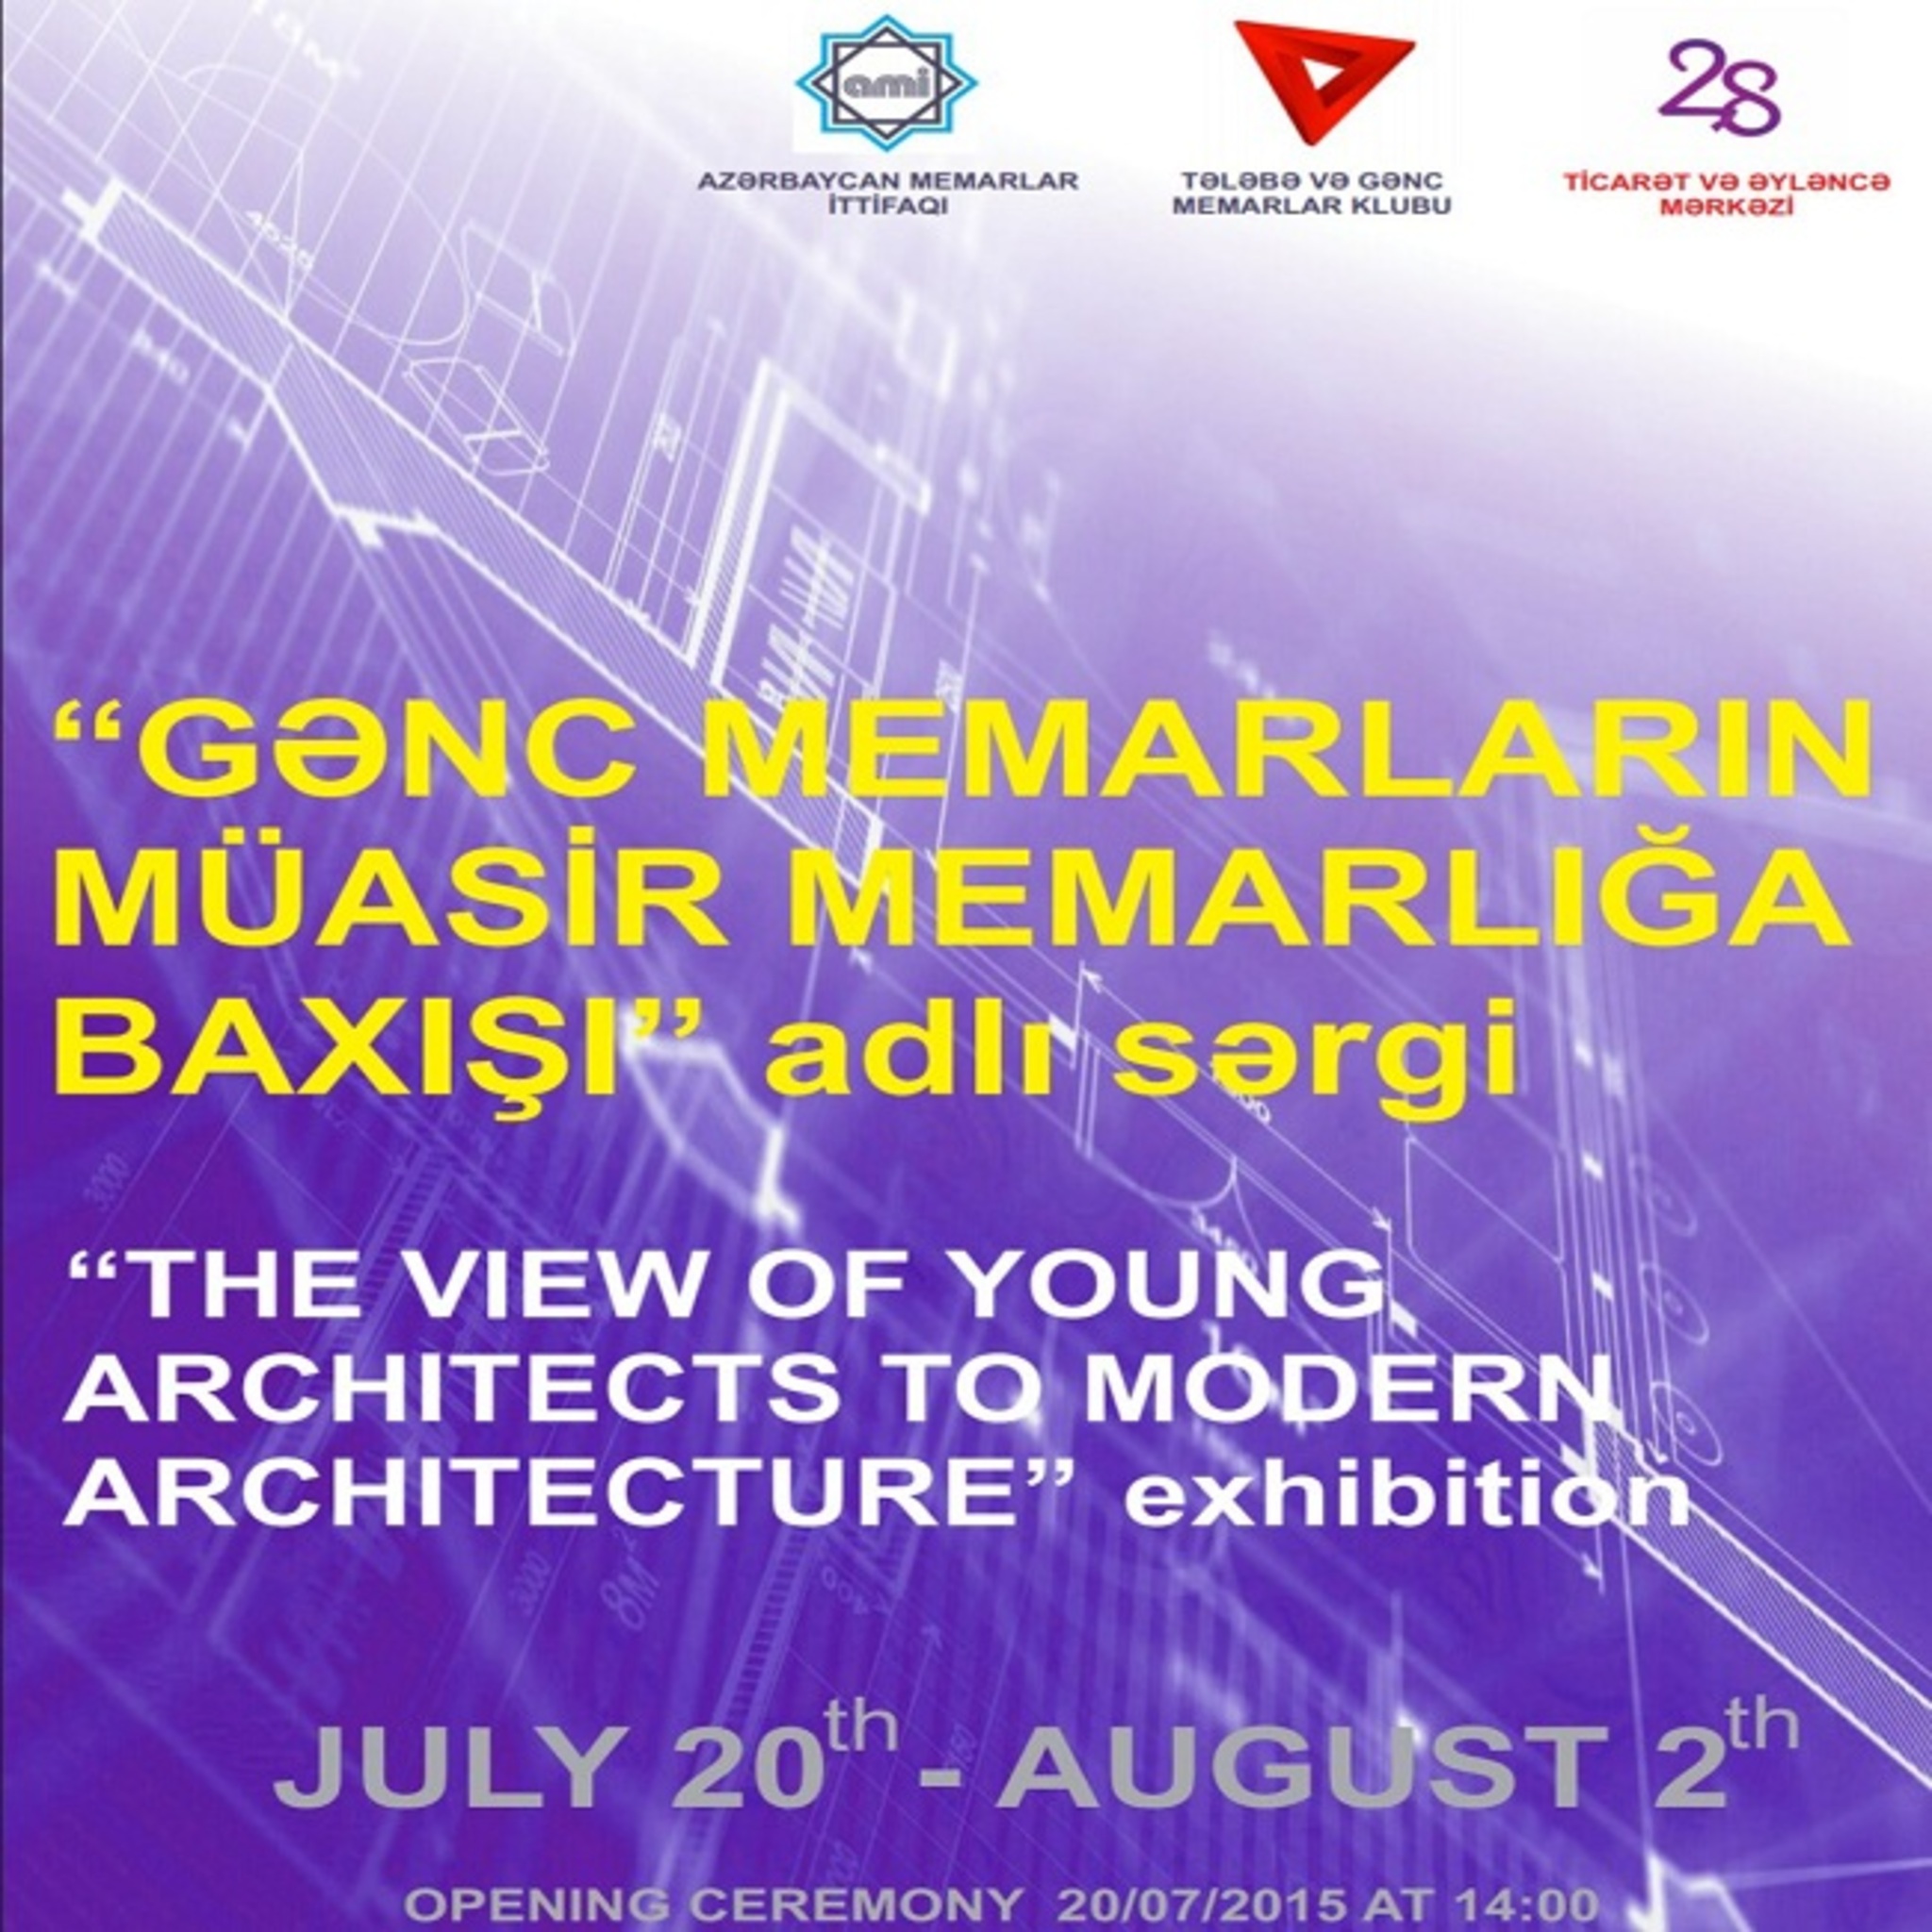 The exhibition Vision of Young Architects of the modern architecture